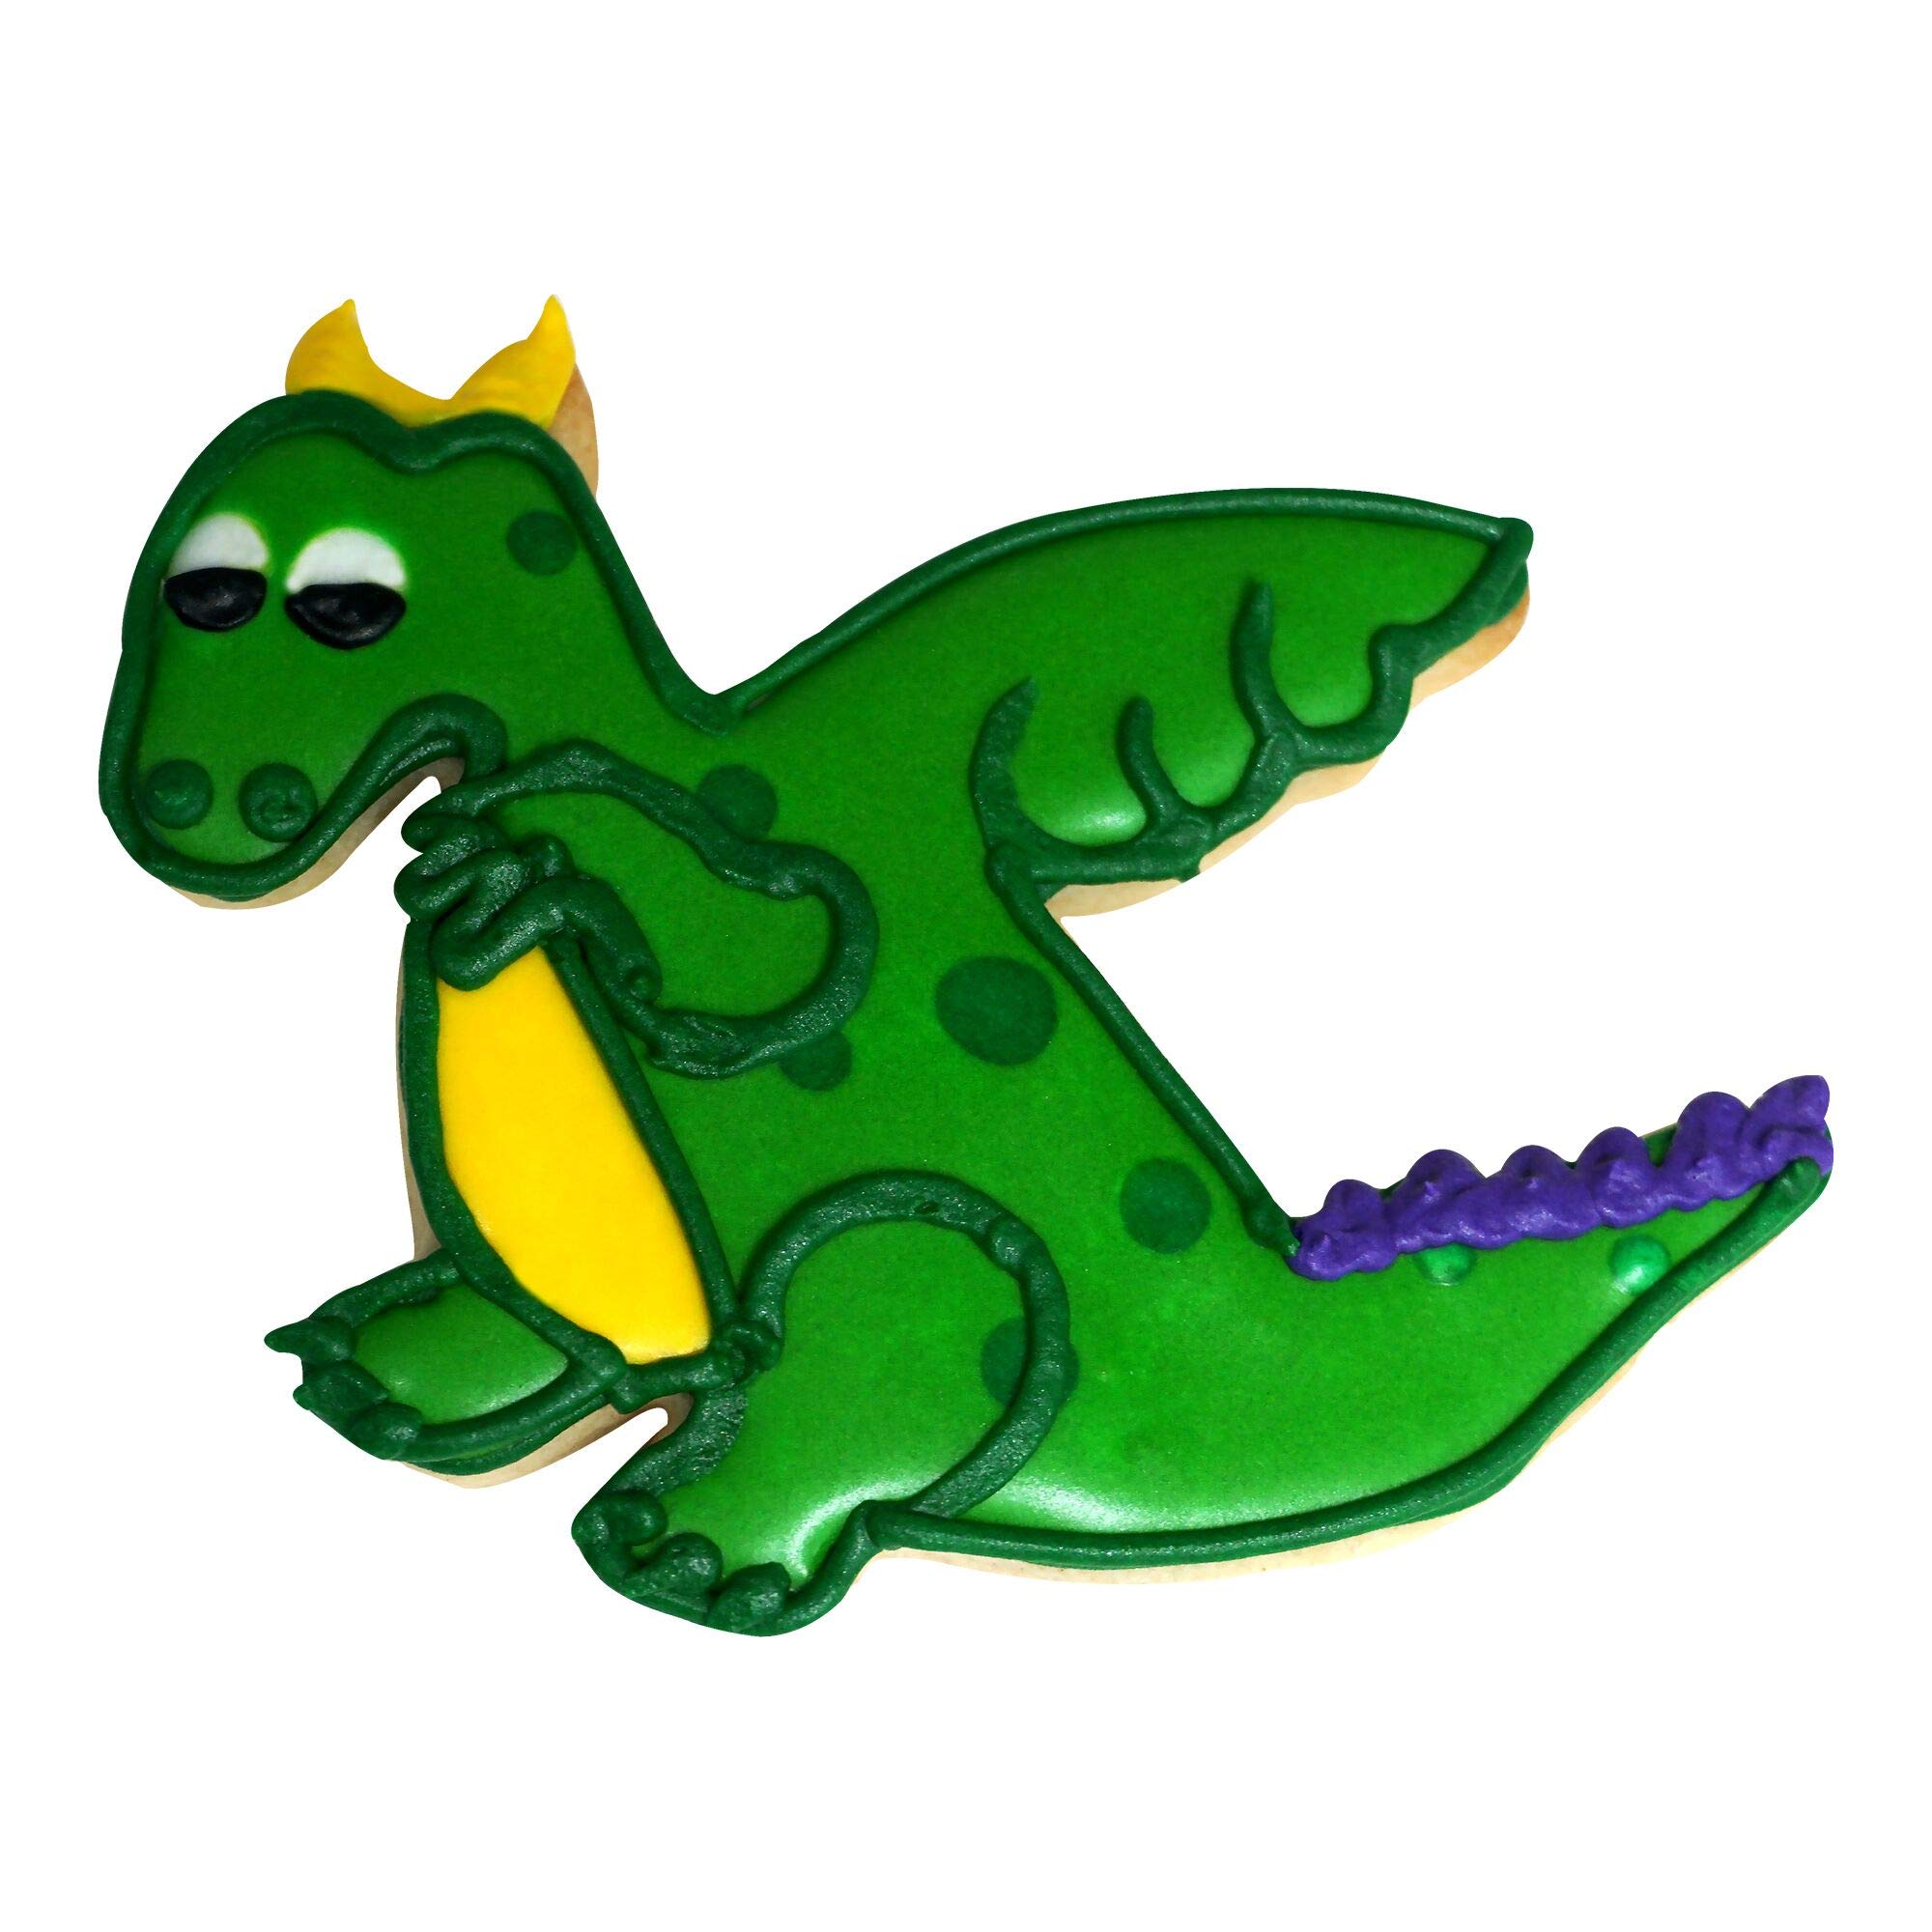 Dragon Dinosaur 3.75 Inch Cookie Cutter from The Cookie Cutter Shop – Tin Plated Steel Cookie Cutter